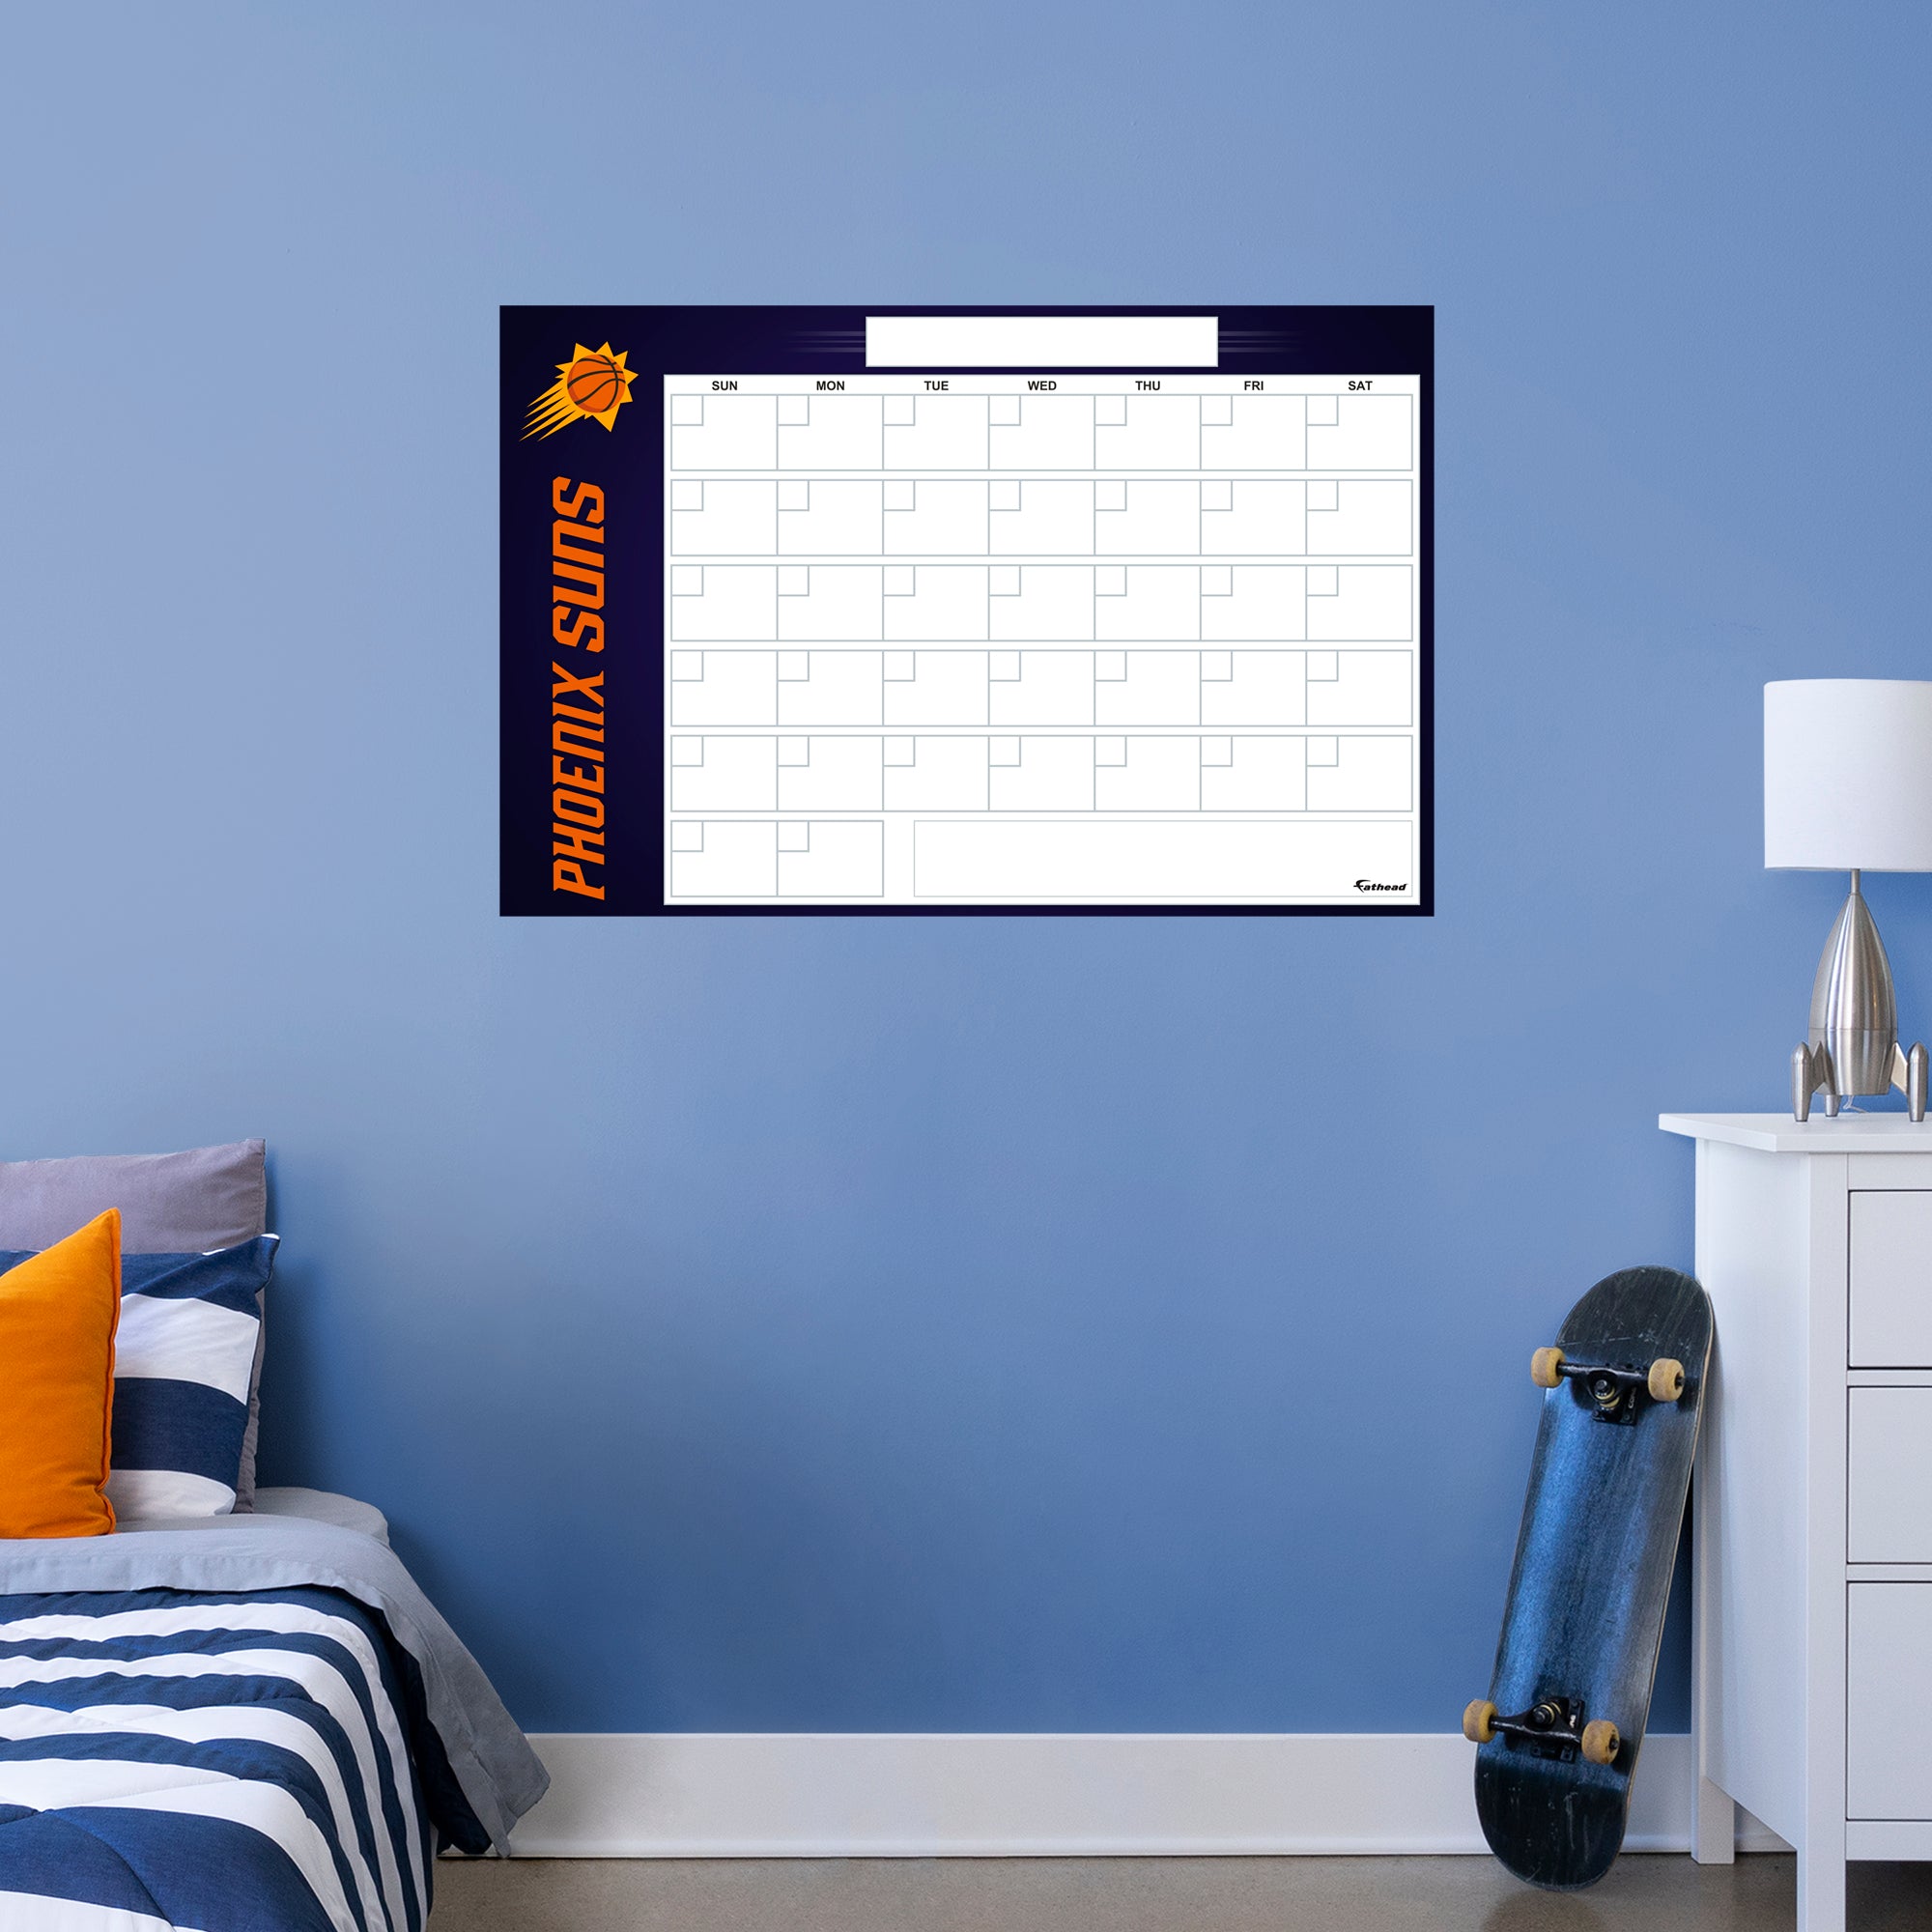 Phoenix Suns Dry Erase Calendar - Officially Licensed NBA Removable Wall Decal Giant Decal (34"W x 52"H) by Fathead | Vinyl